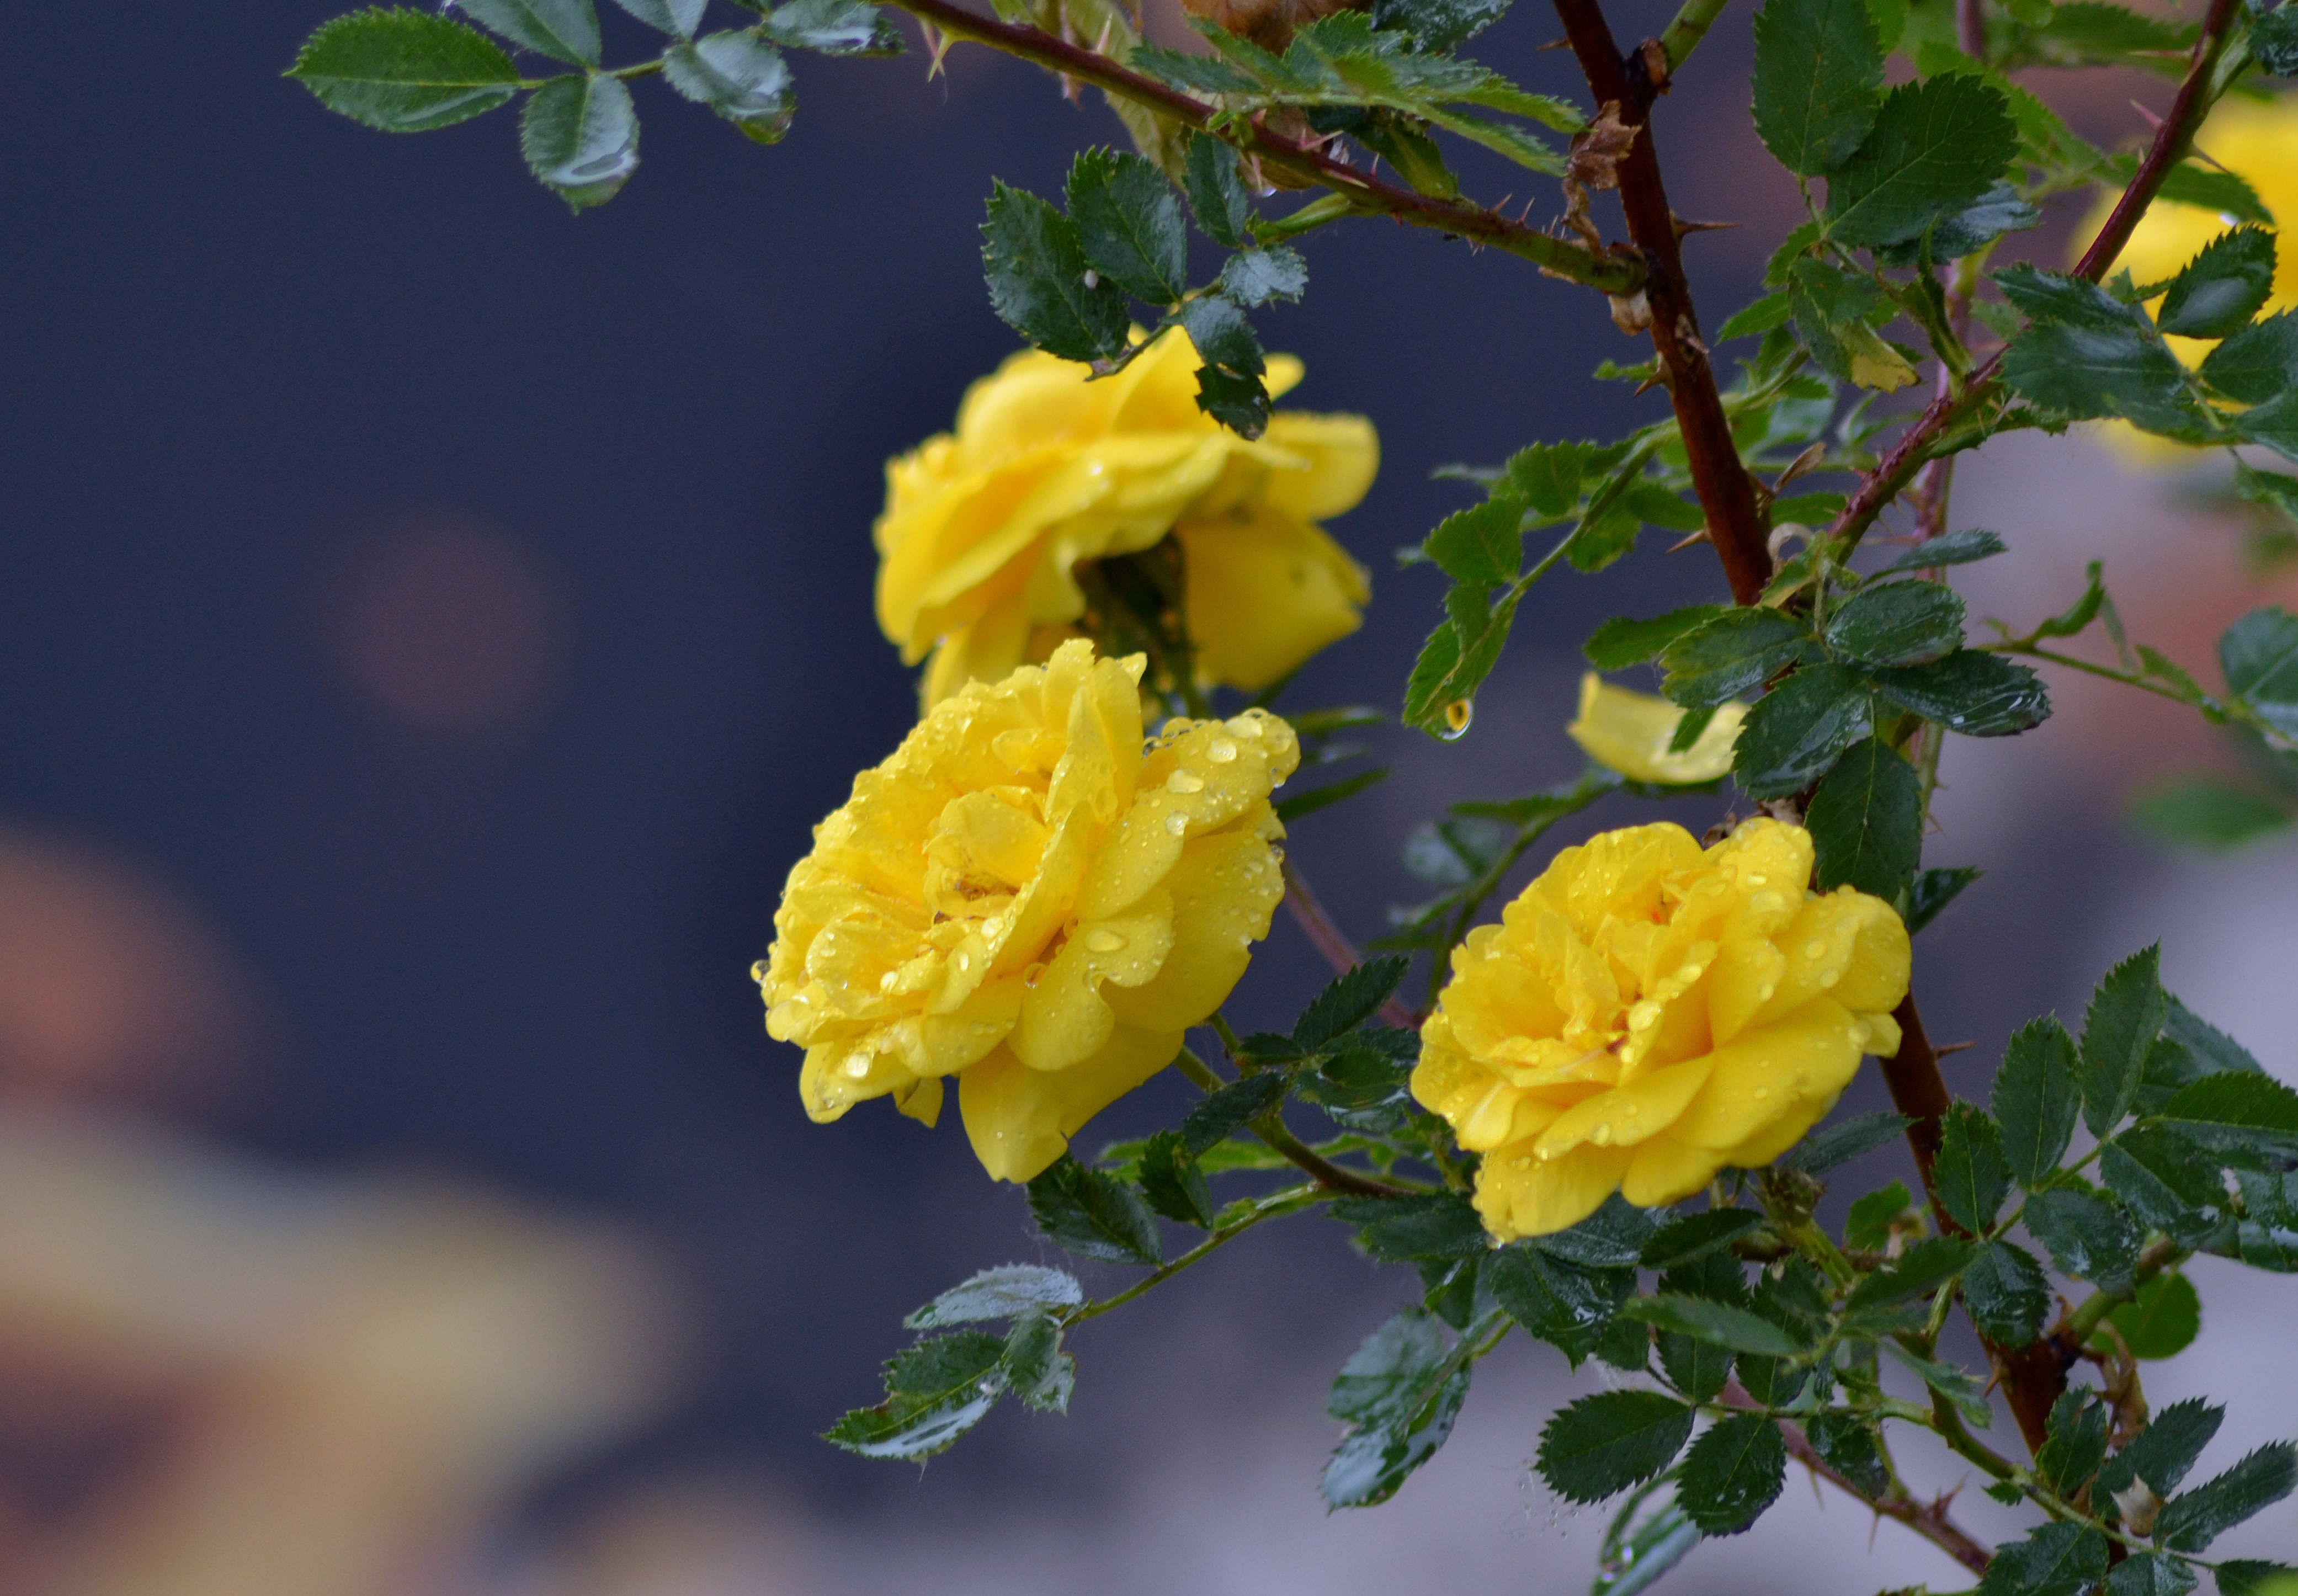 roses, yellow roses, flowers, drops, branch cellphone